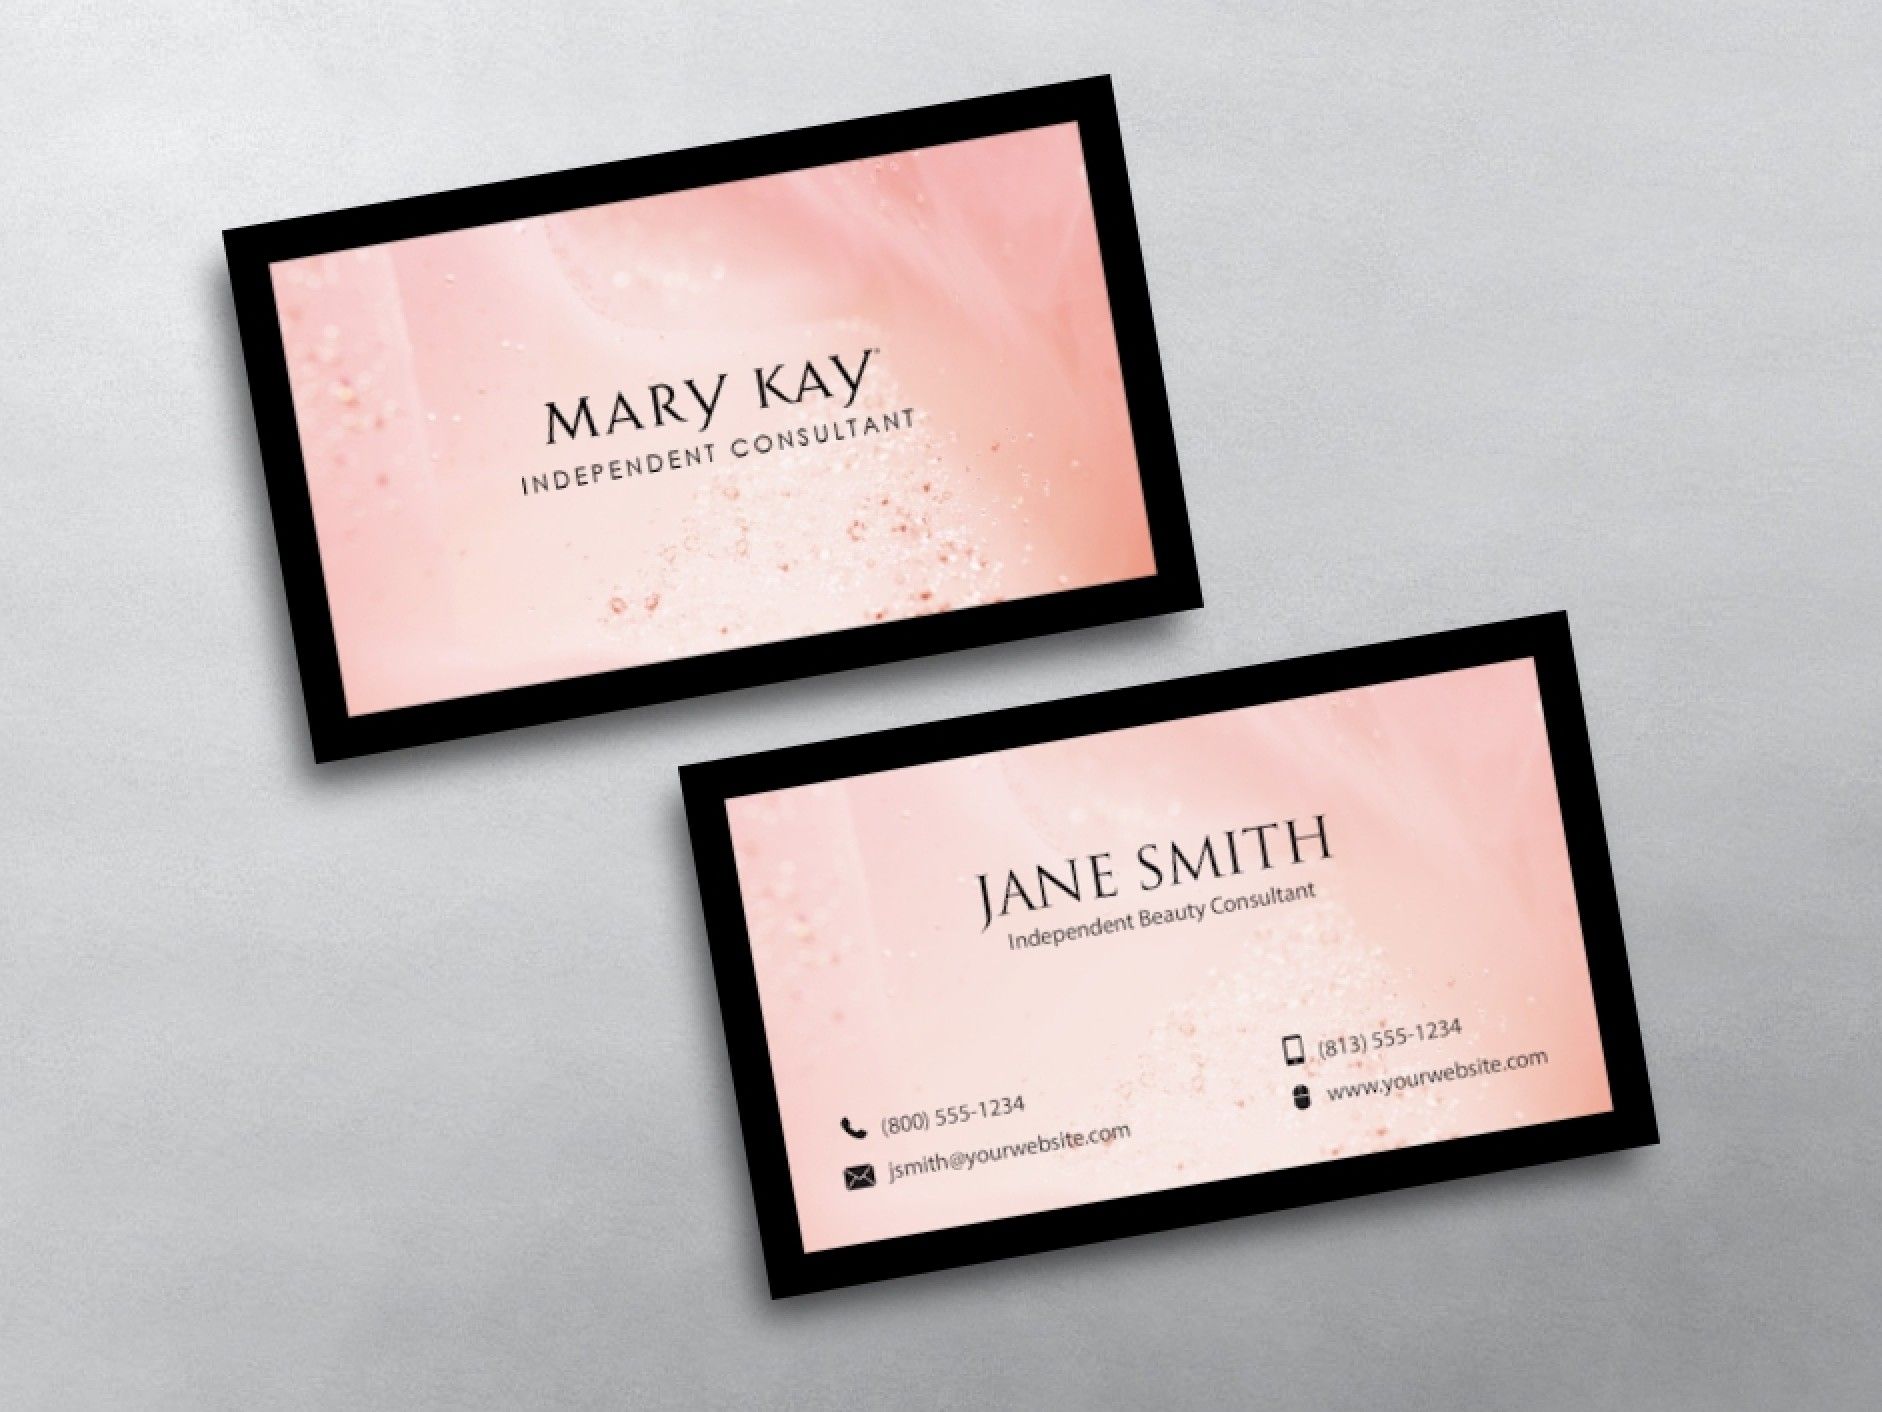 marykay business cards 3